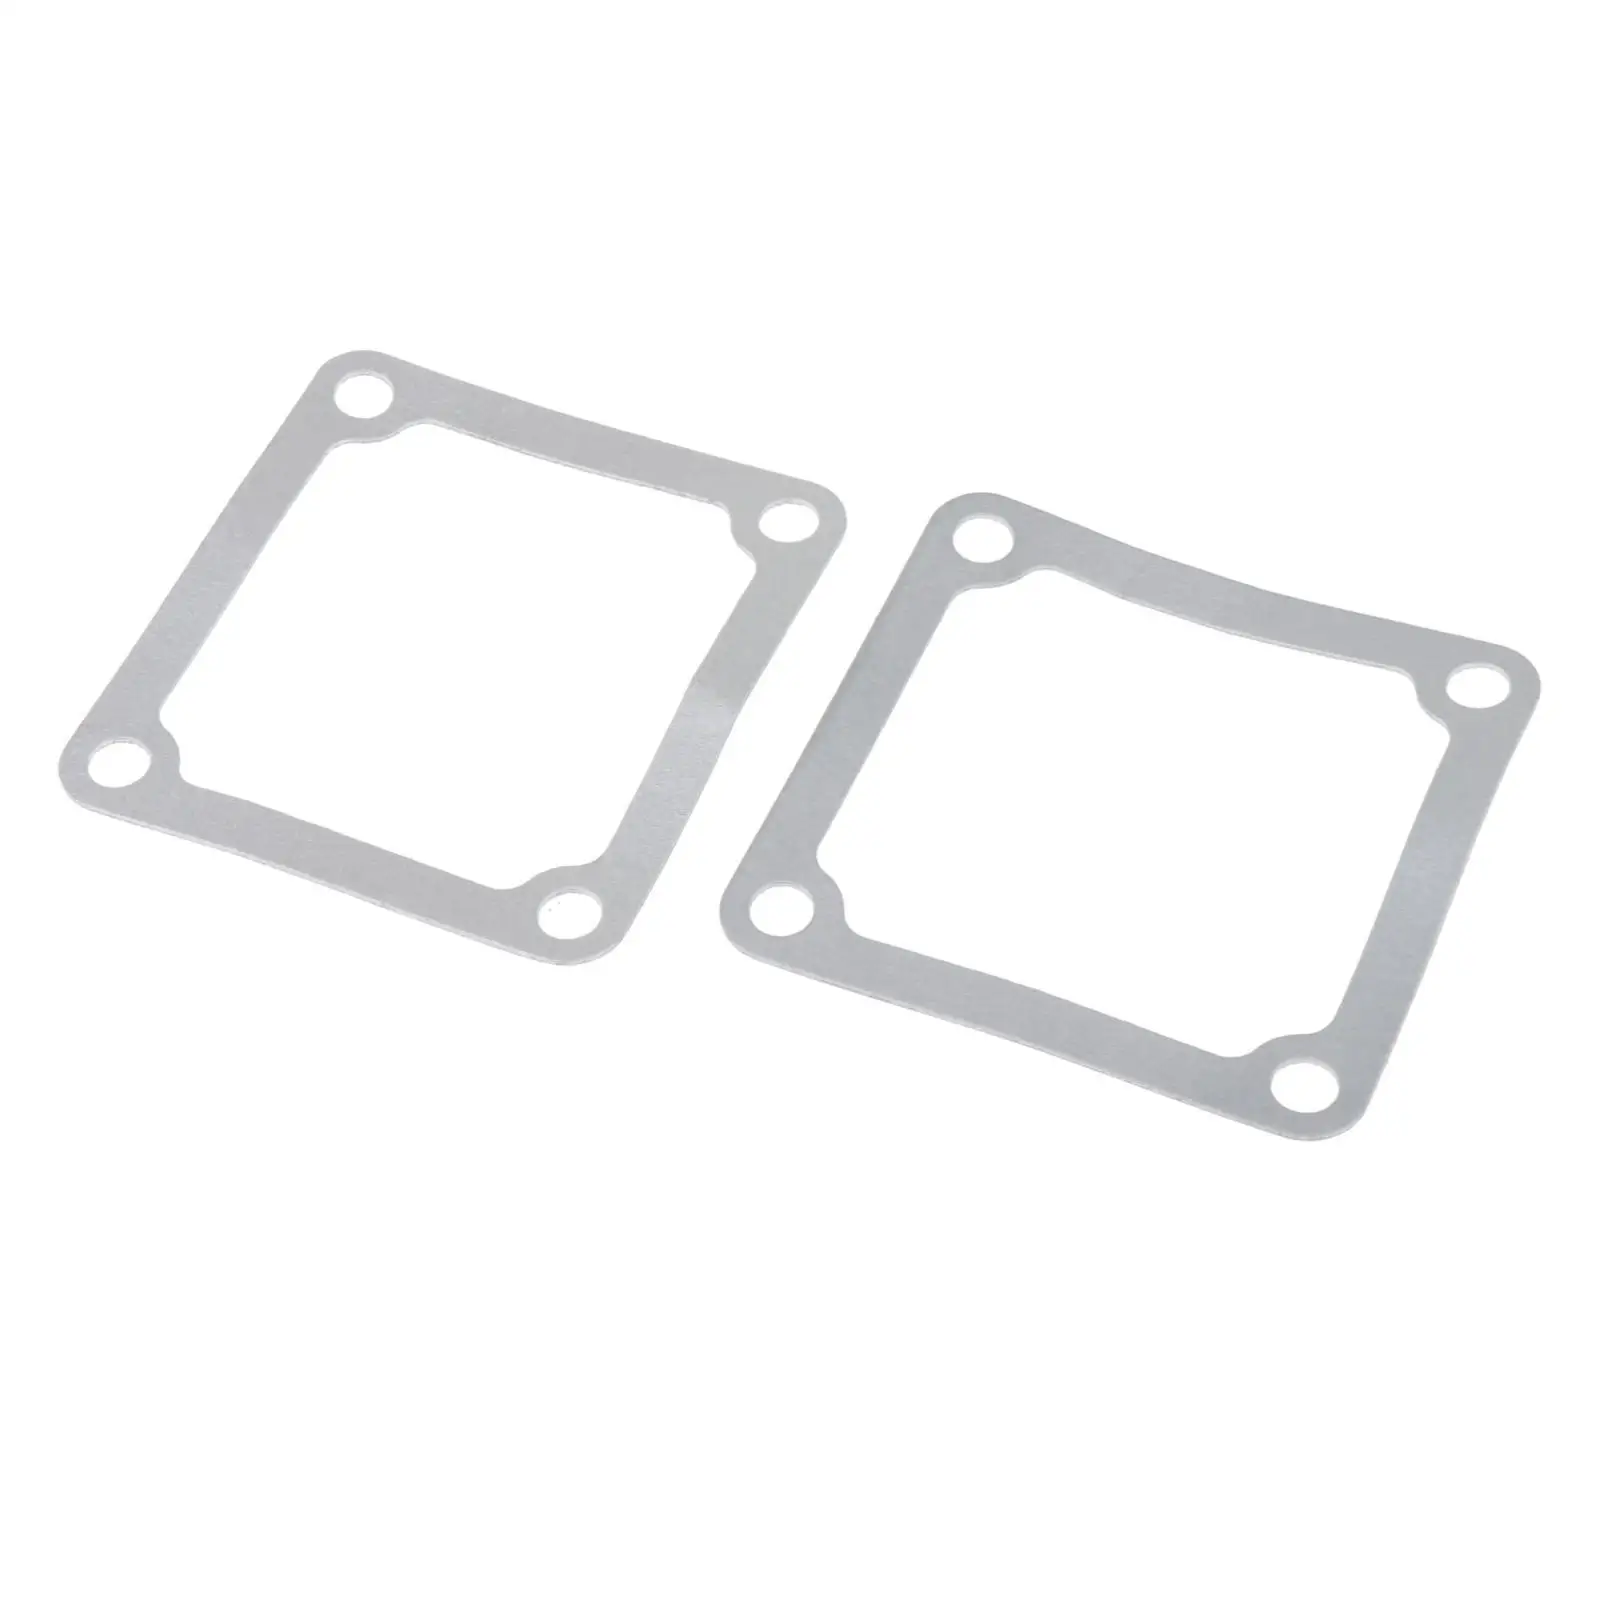 2x Intake Heater Grid Gaskets Auto Parts 93x98mm Direct Replaces Sturdy